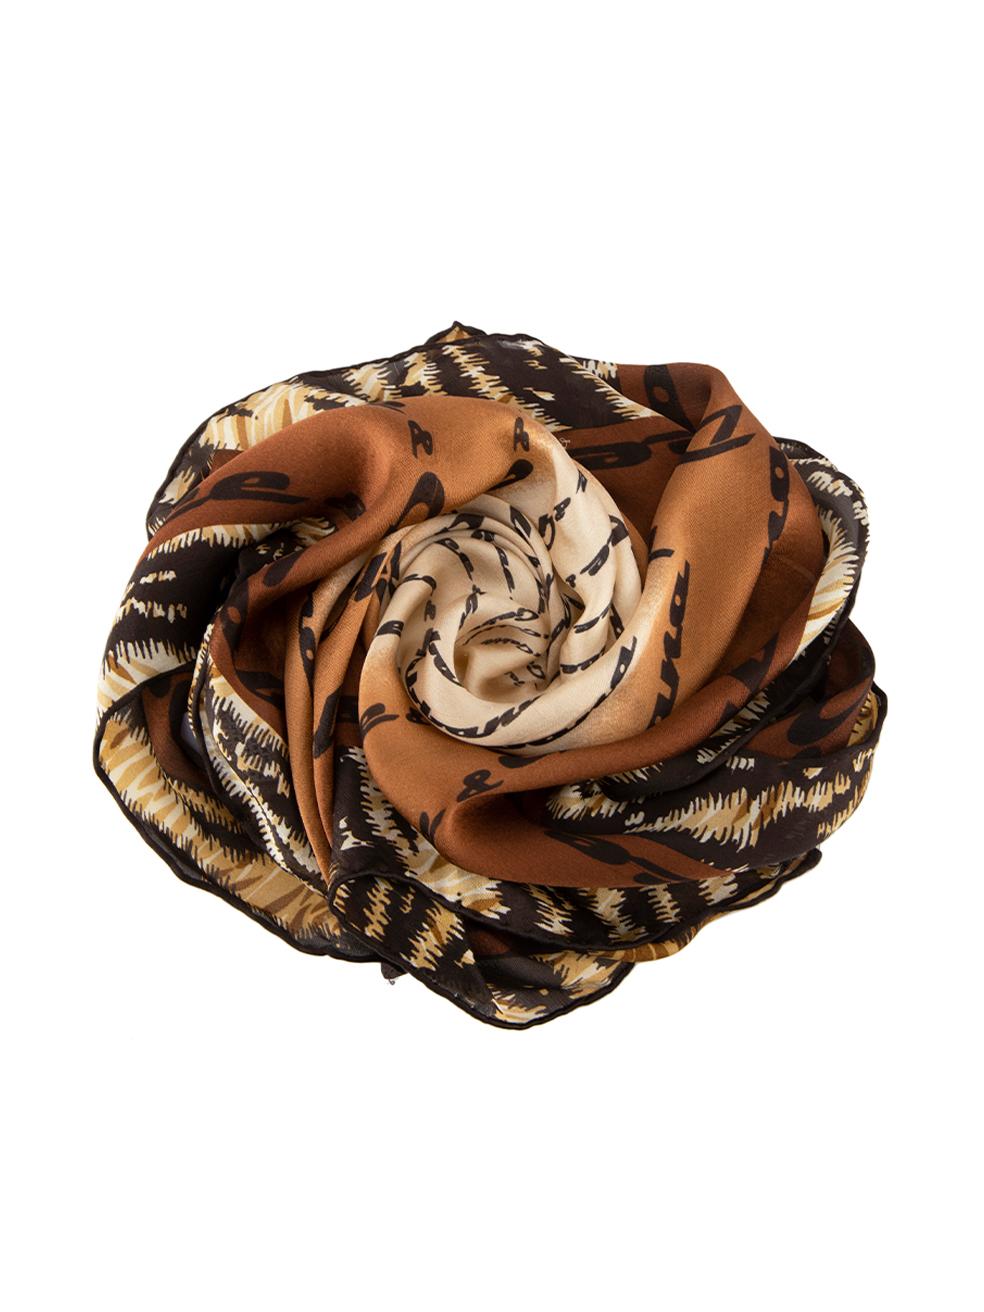 CONDITION is Good. Minor wear to scarf is evident. Light wear to silk with a number of pulls to the weave troughout on this used Dolce & Gabbana designer resale item.



Details


Brown

Silk

Square scarf

Logo and animal print pattern





Made in